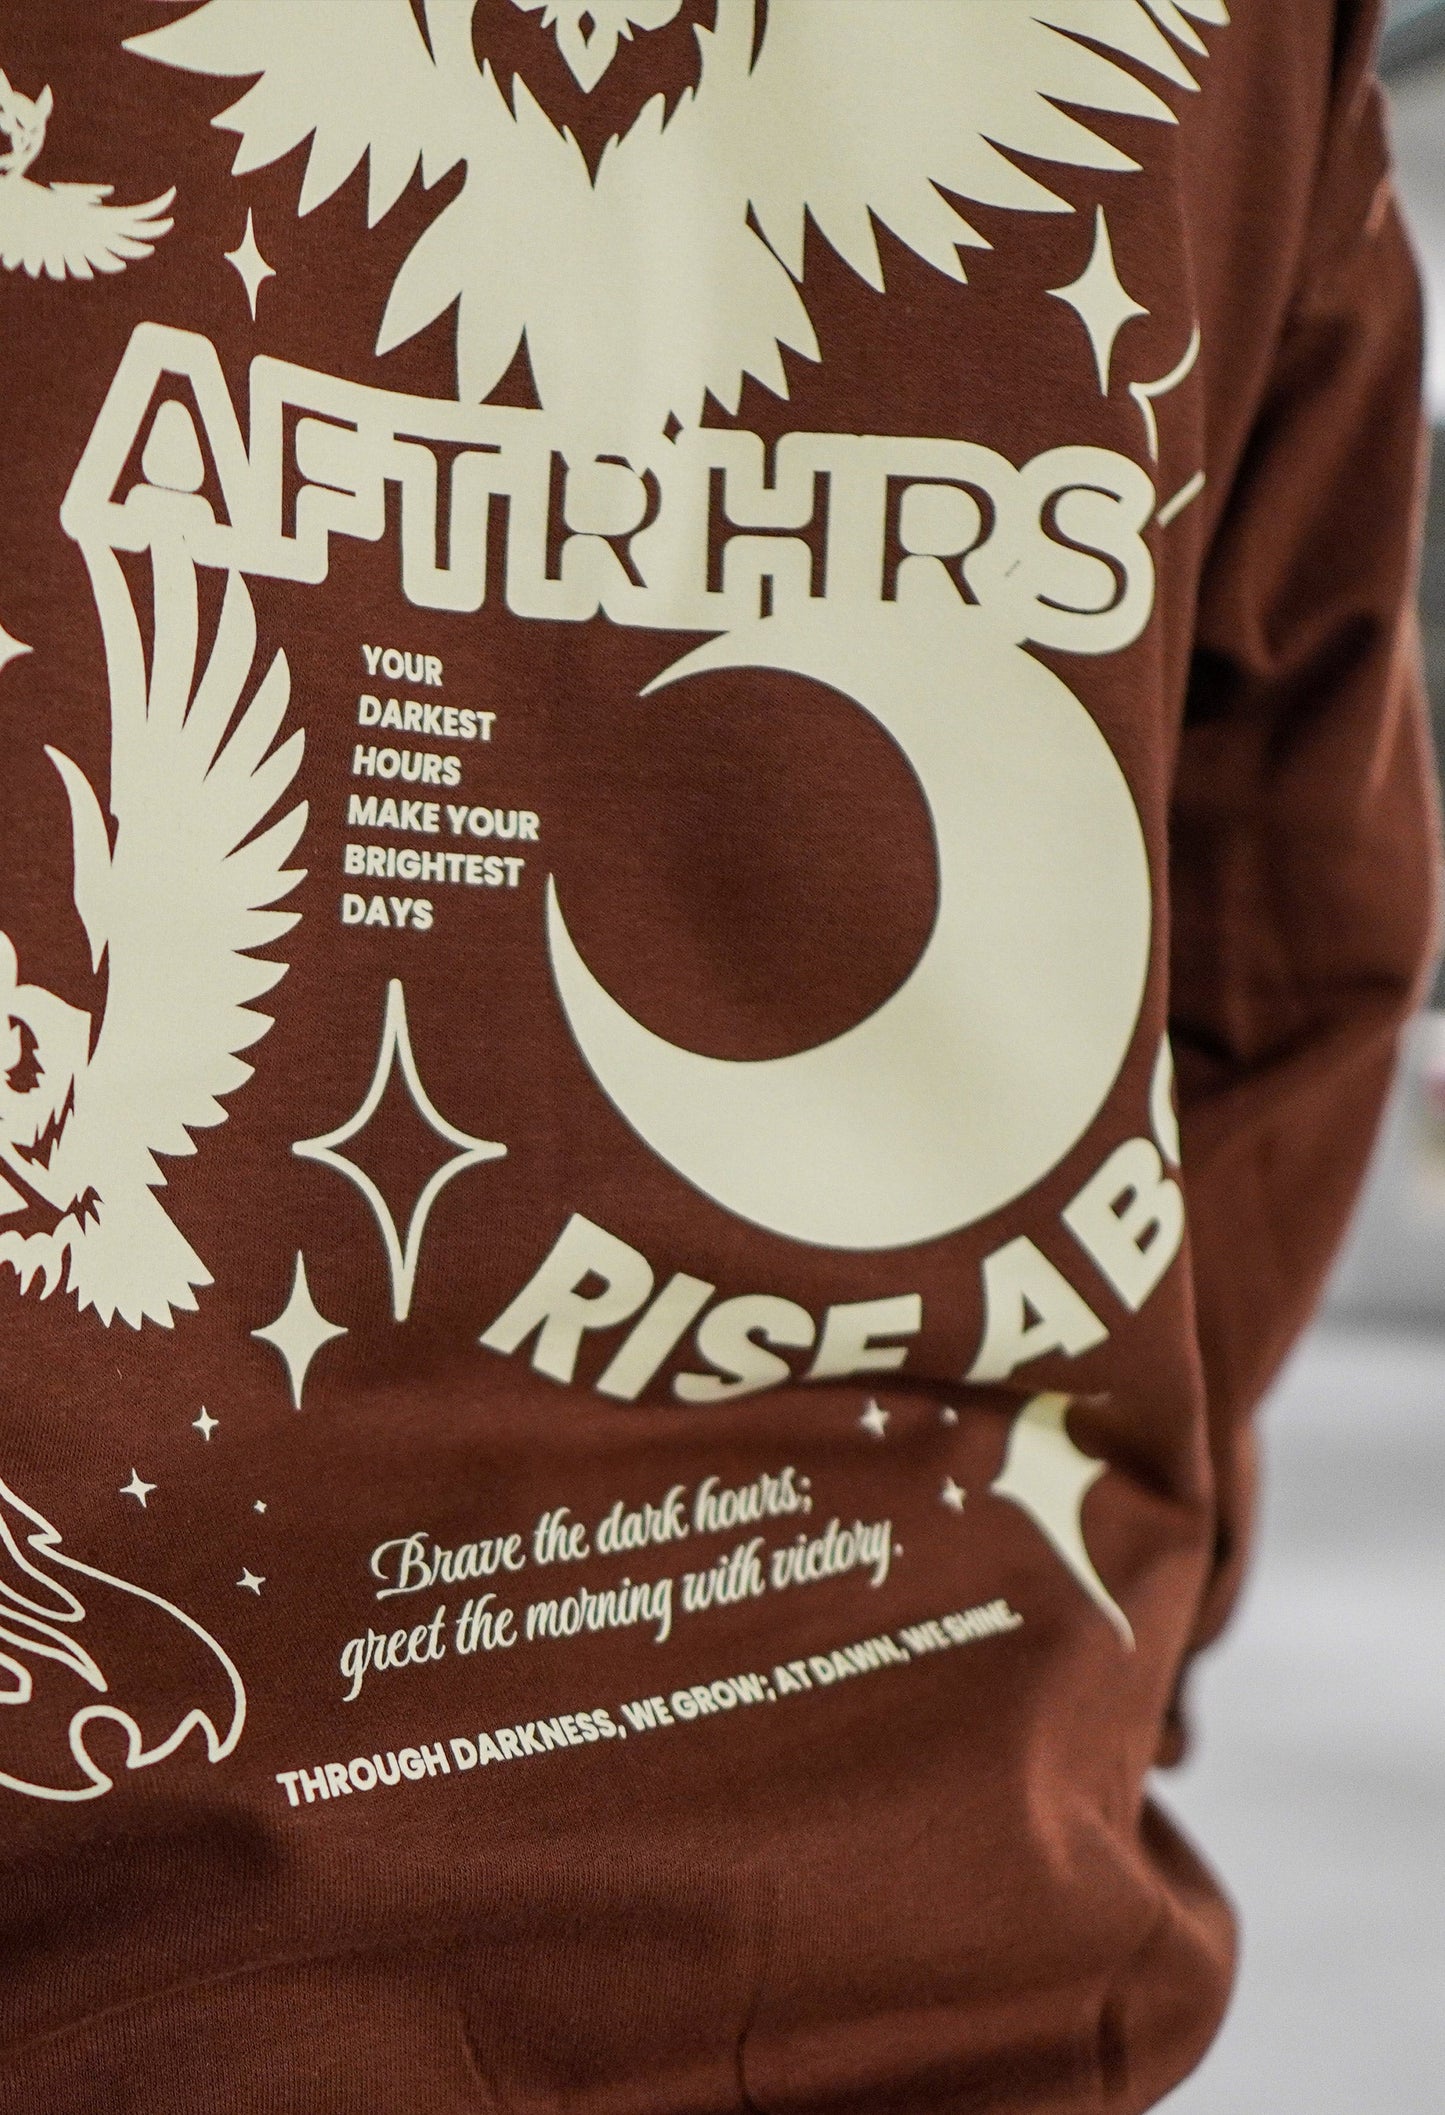 Rise Above Hoodie - Brown / Cream - FREE w/ Purchase of 2 Hoodies